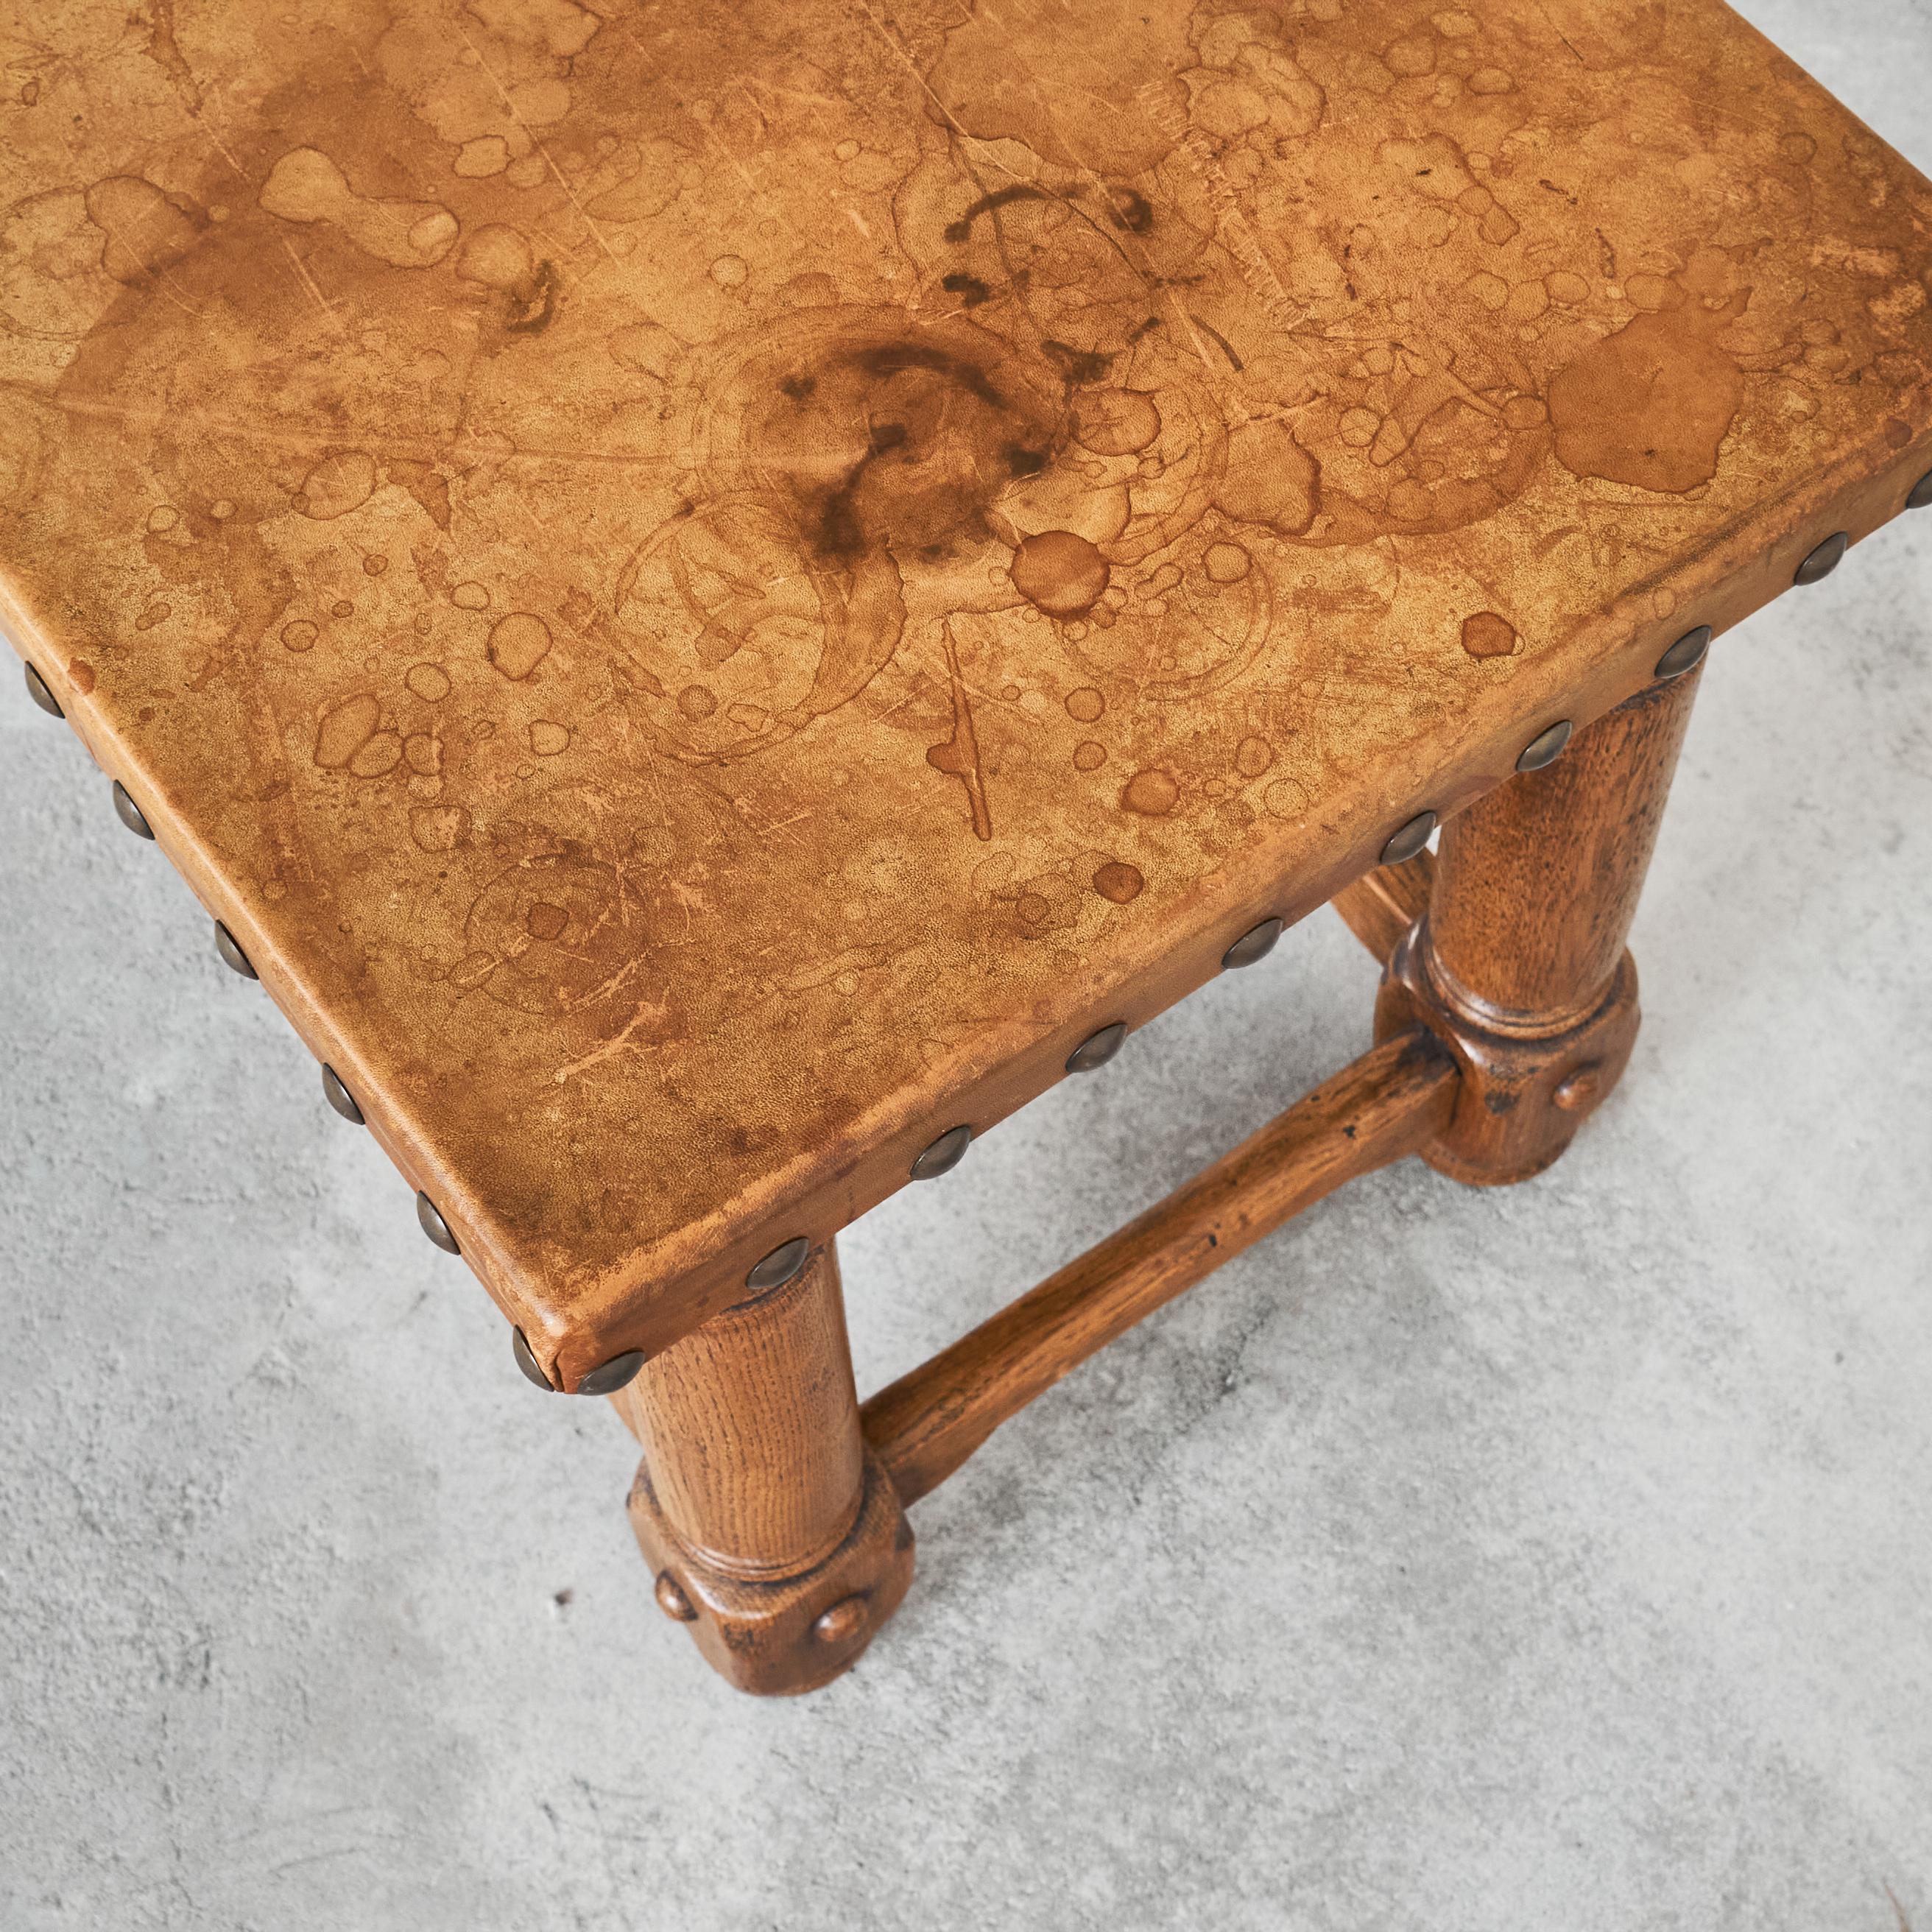 Spanish Brutalist Coffee Table in Solid Oak, Metal and Patinated Leather 1940s For Sale 9